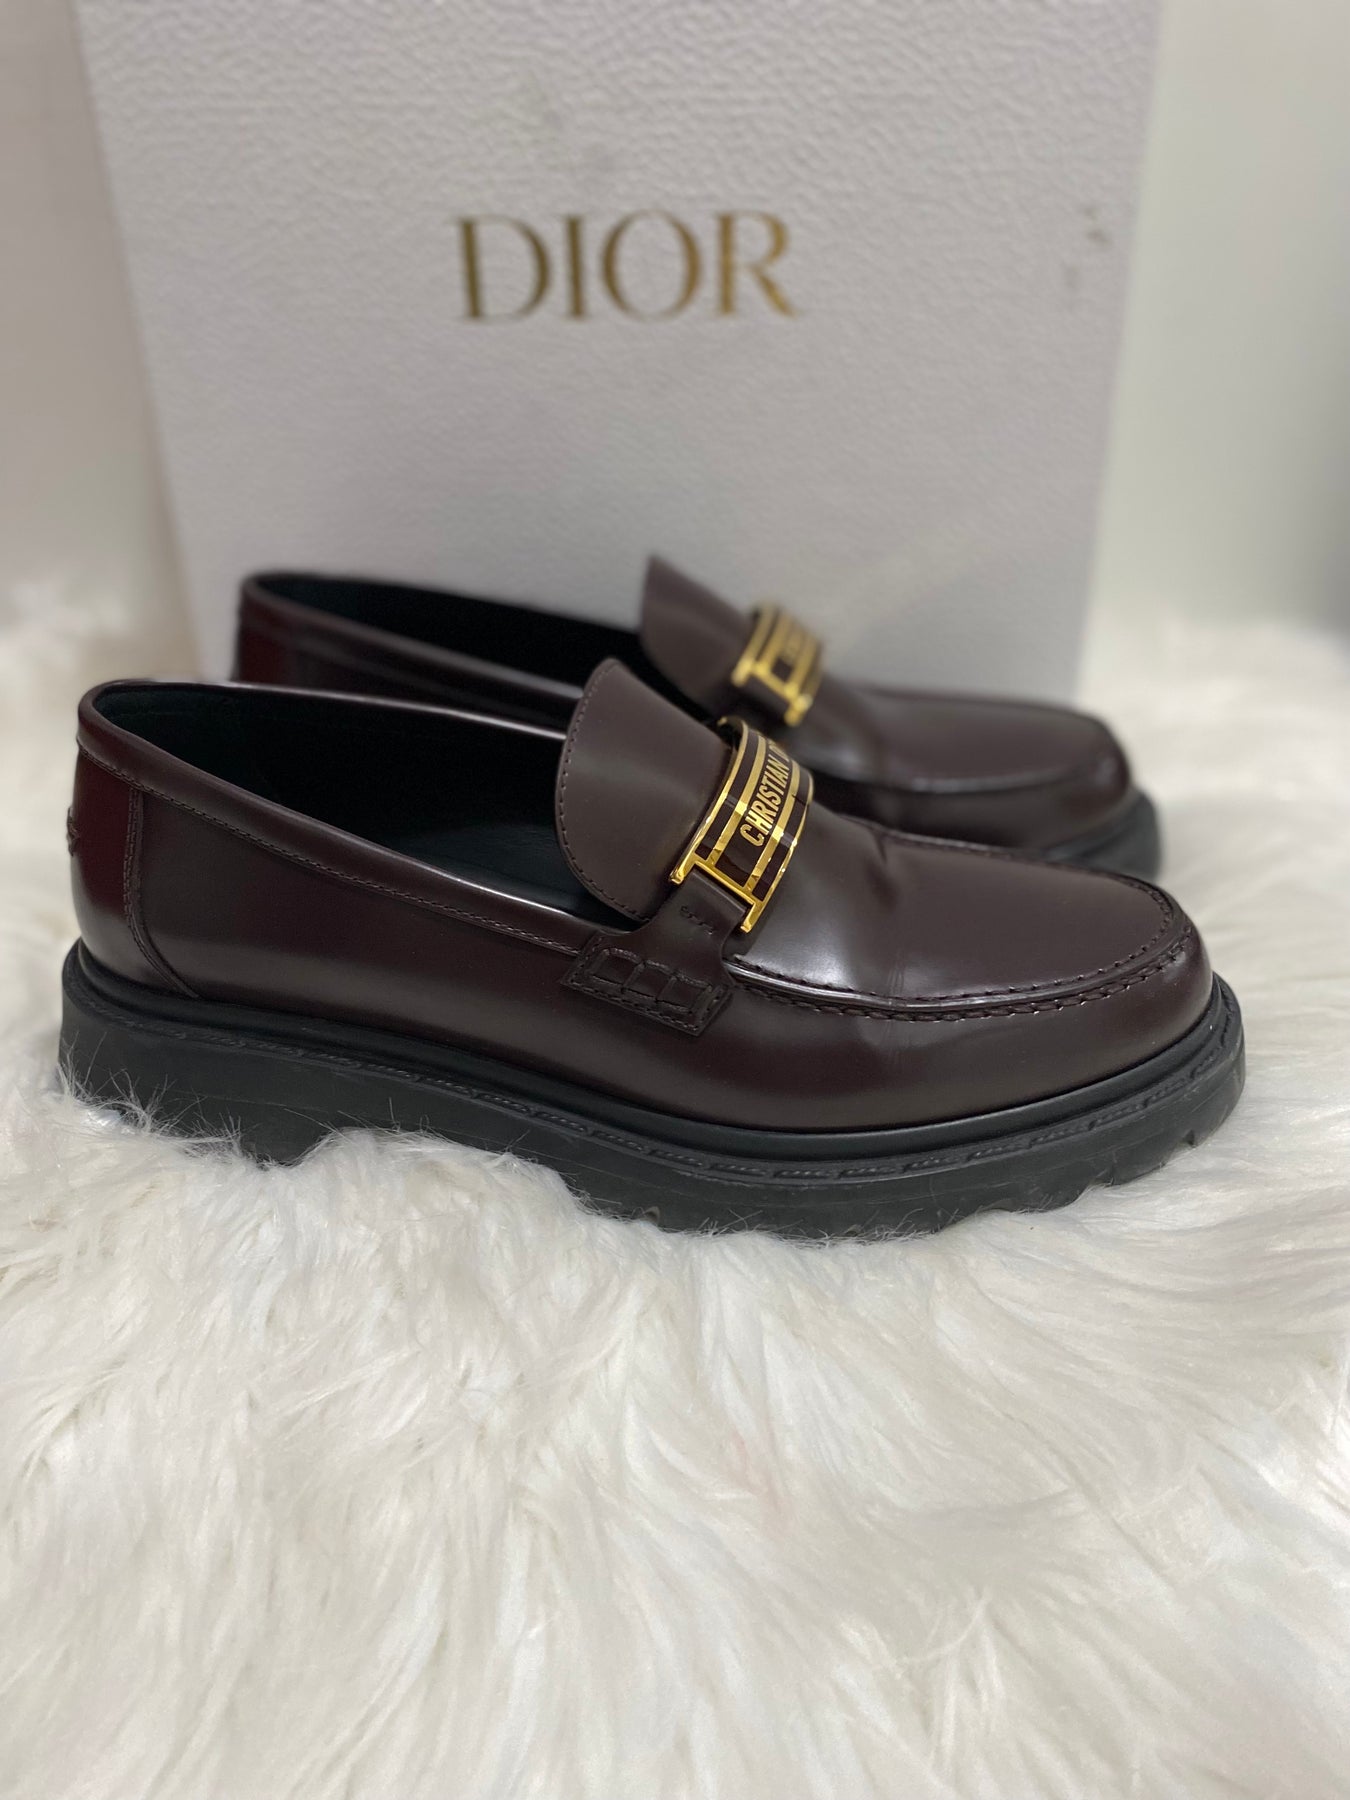 Shop Christian Dior 202223FW Plain Toe Loafers Unisex Street Style Plain  Leather U Tips by WORLDCOLLECTIBLES  BUYMA